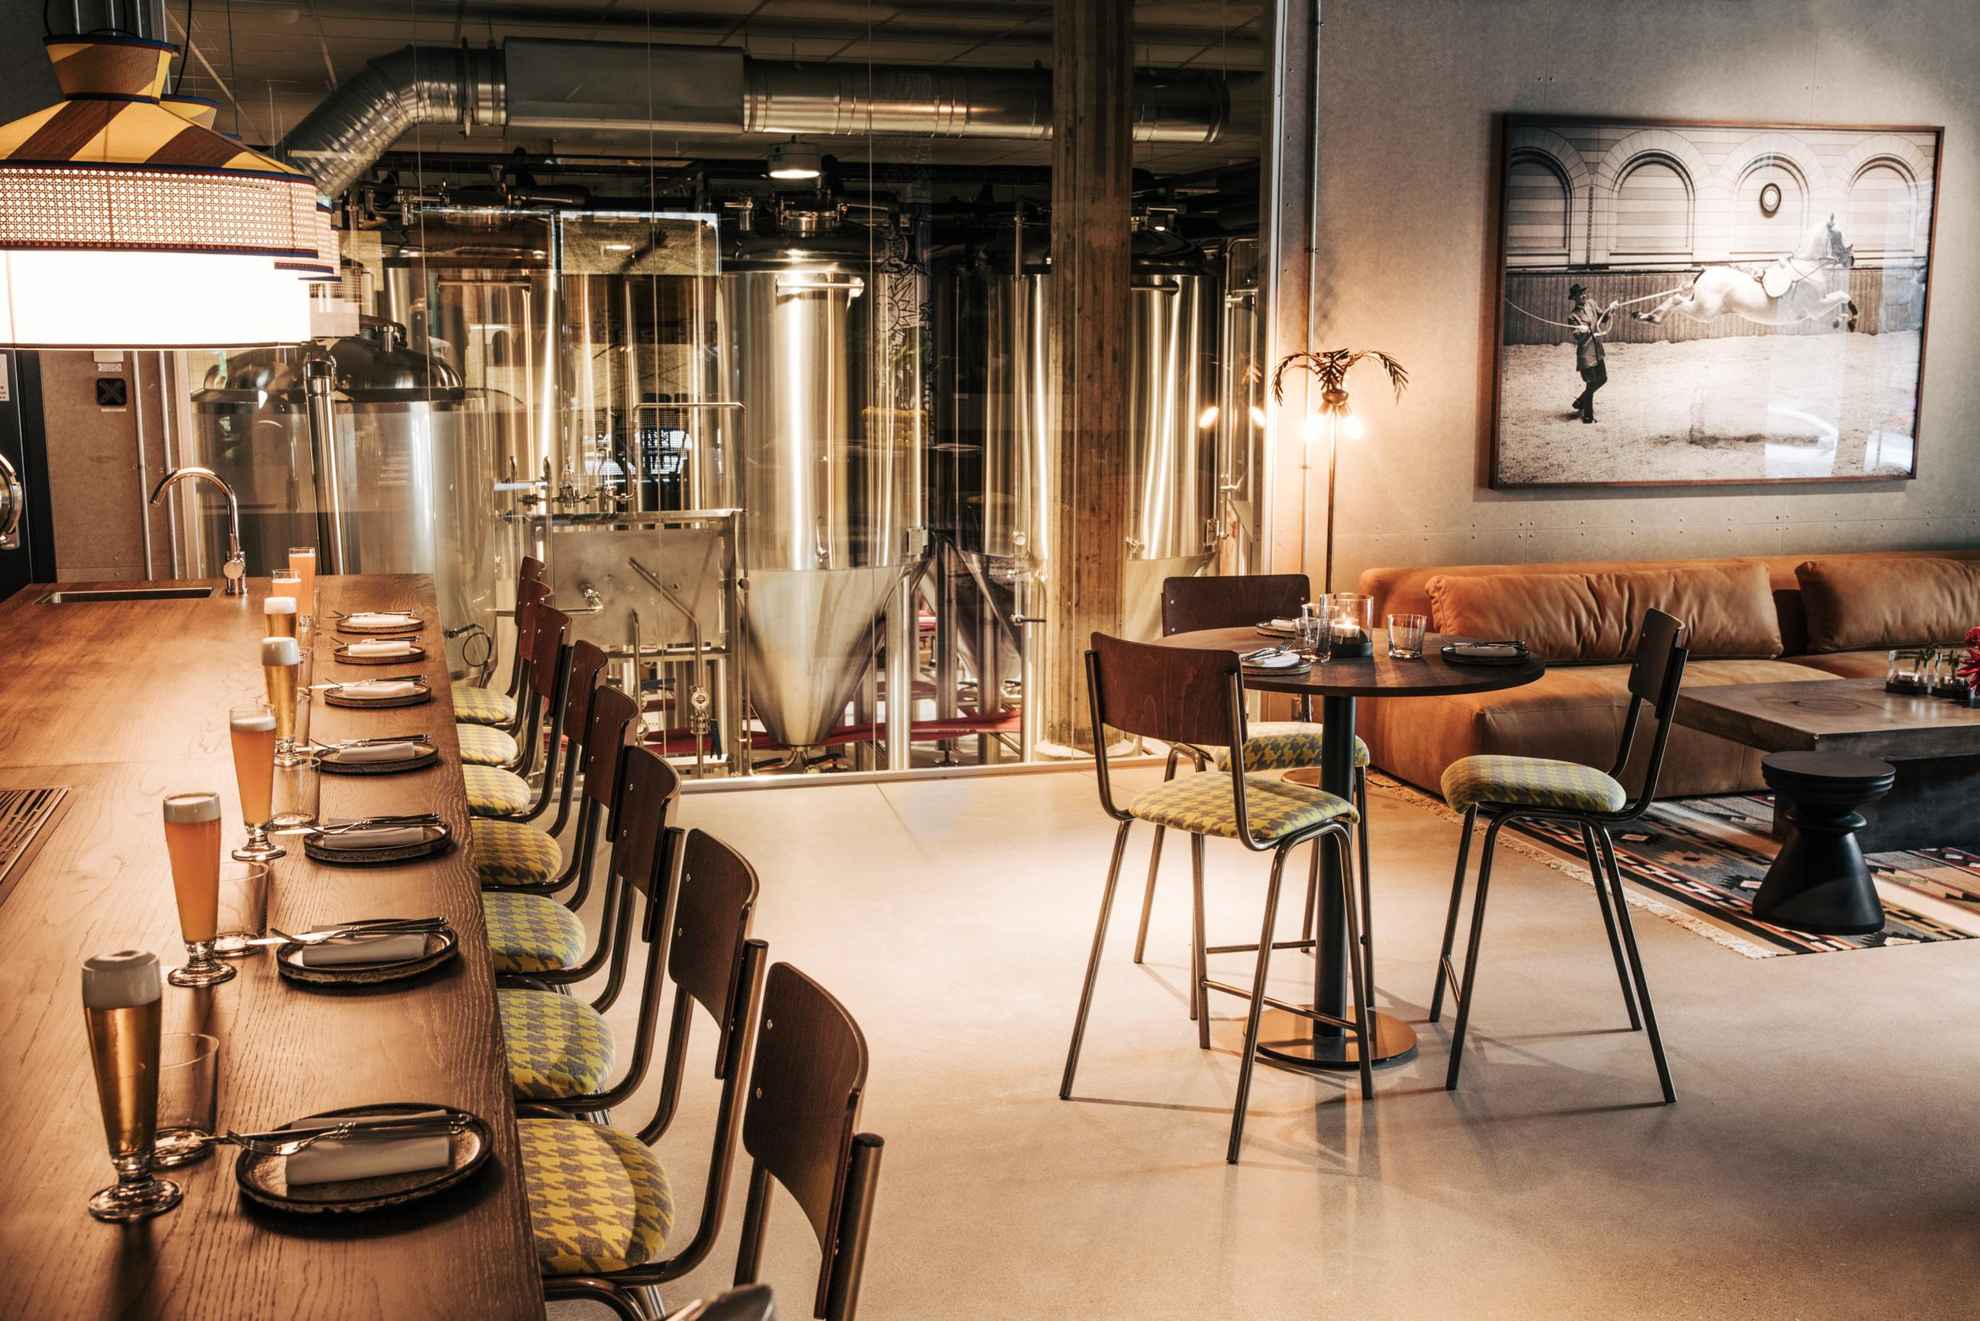 Inside a restaurant, the bar to the left is set with glasses of beer, there is a set table with three chairs and a sofa to the right. In the background behind a glass wall you can see a brewery.